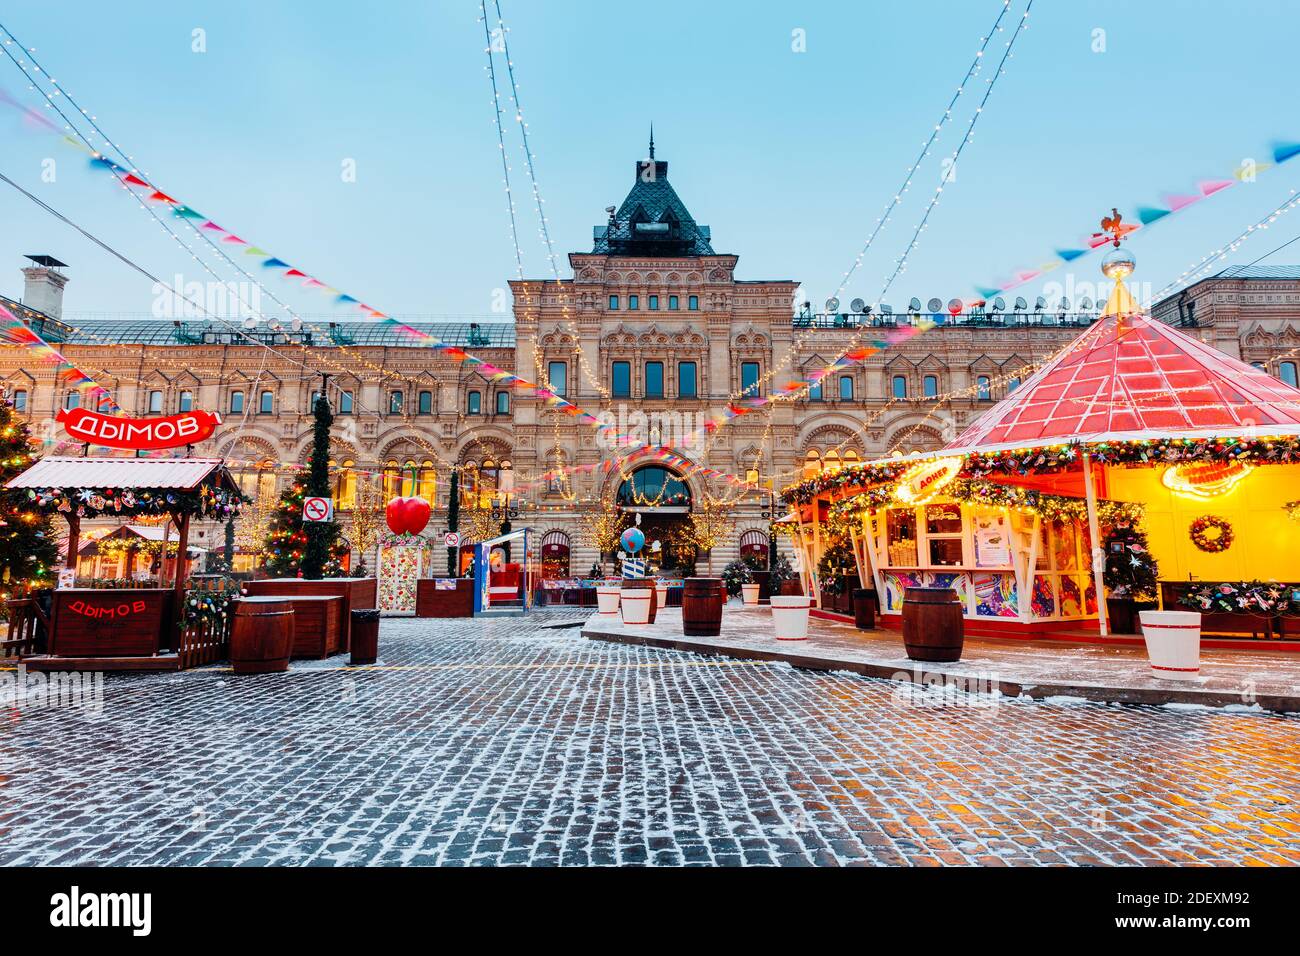 Moscow, Russia - December 15, 2019: GUM yarmarka the Christmas Market on the Red Square on December 15, 2019 in Moscow, Russia Stock Photo